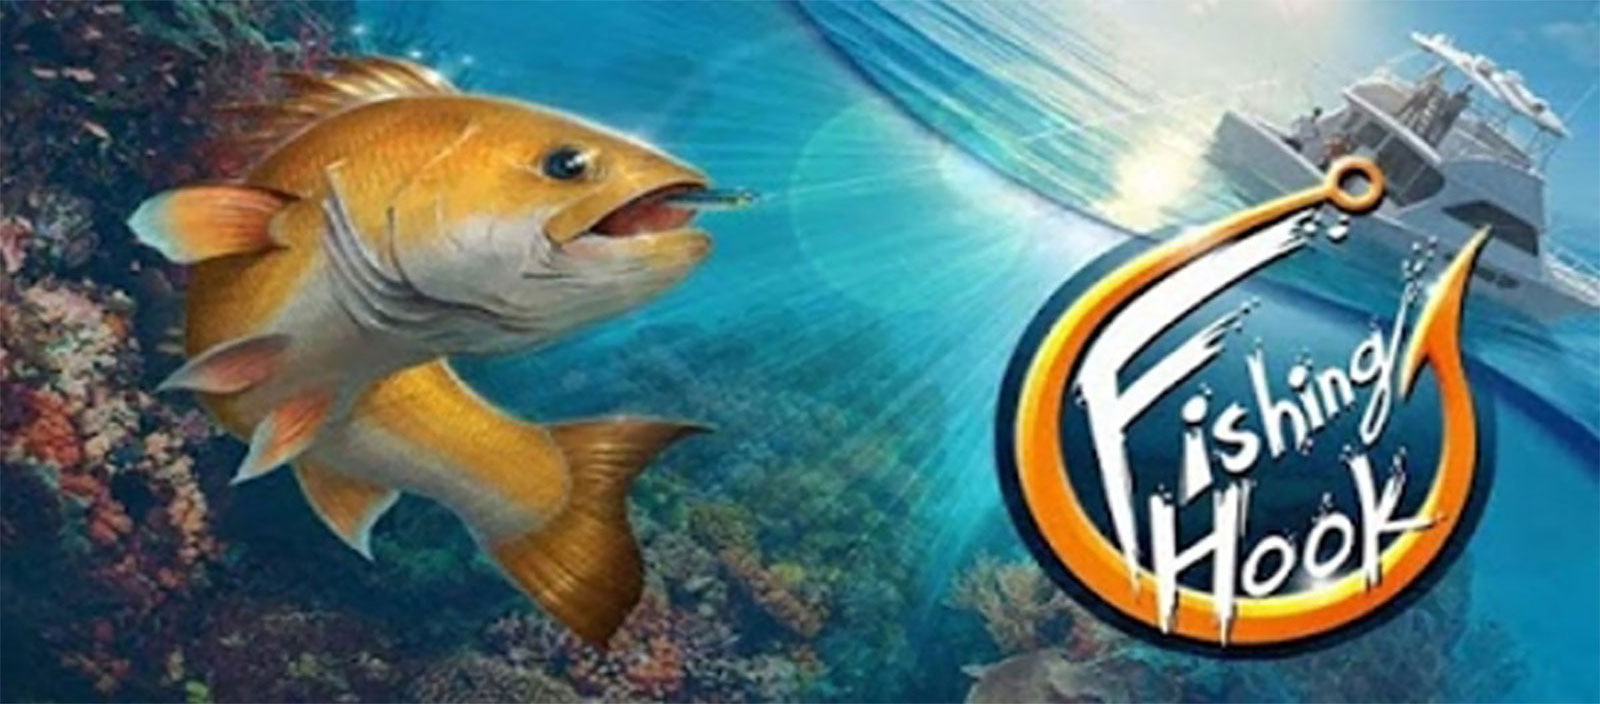 Fishing Hook Mod Apk 2.4.5 (Unlimited Money) Download For Android